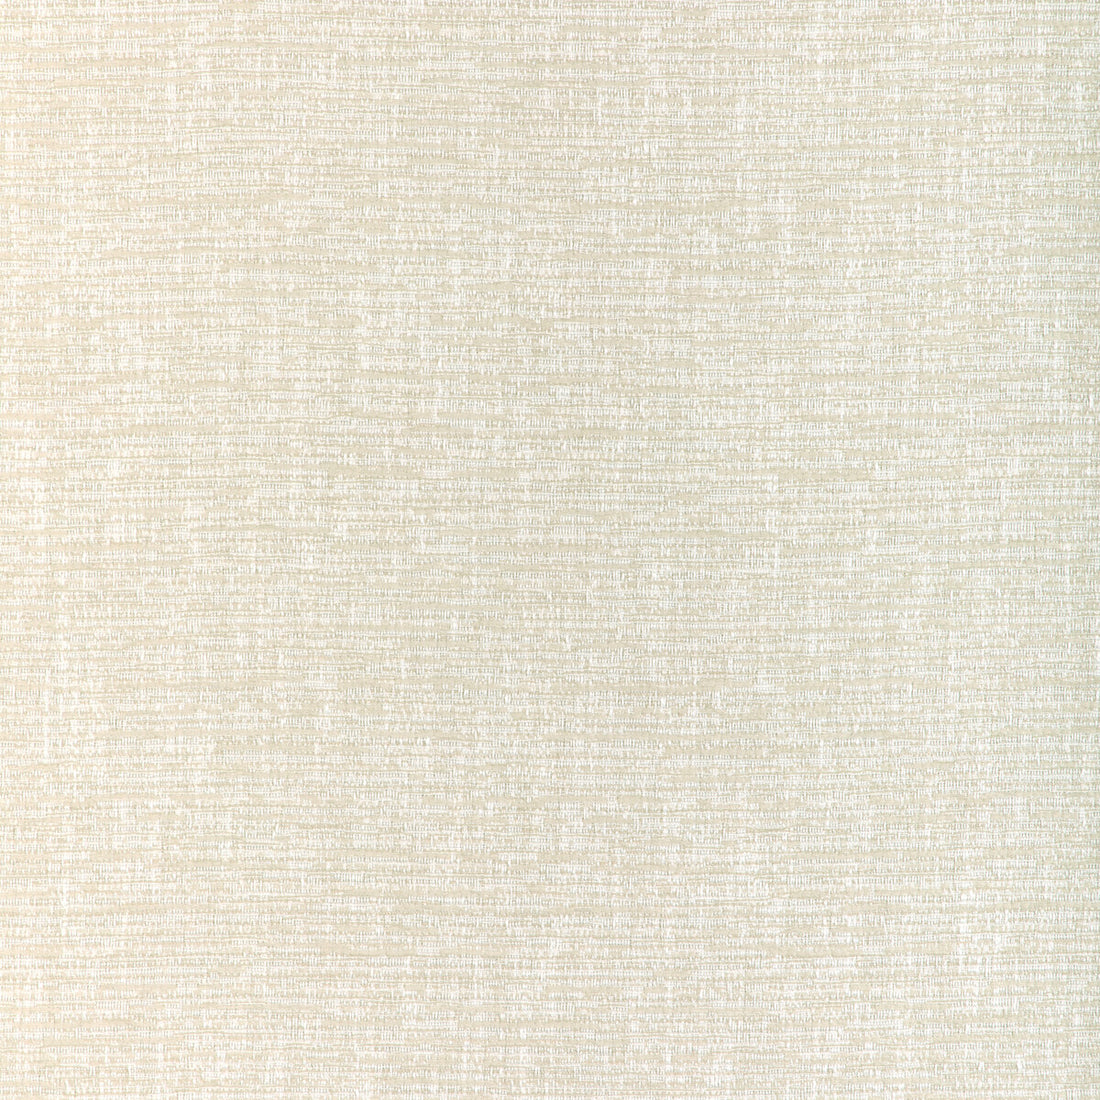 Bellows fabric in cream color - pattern 37048.1.0 - by Kravet Design in the Thom Filicia Latitude collection